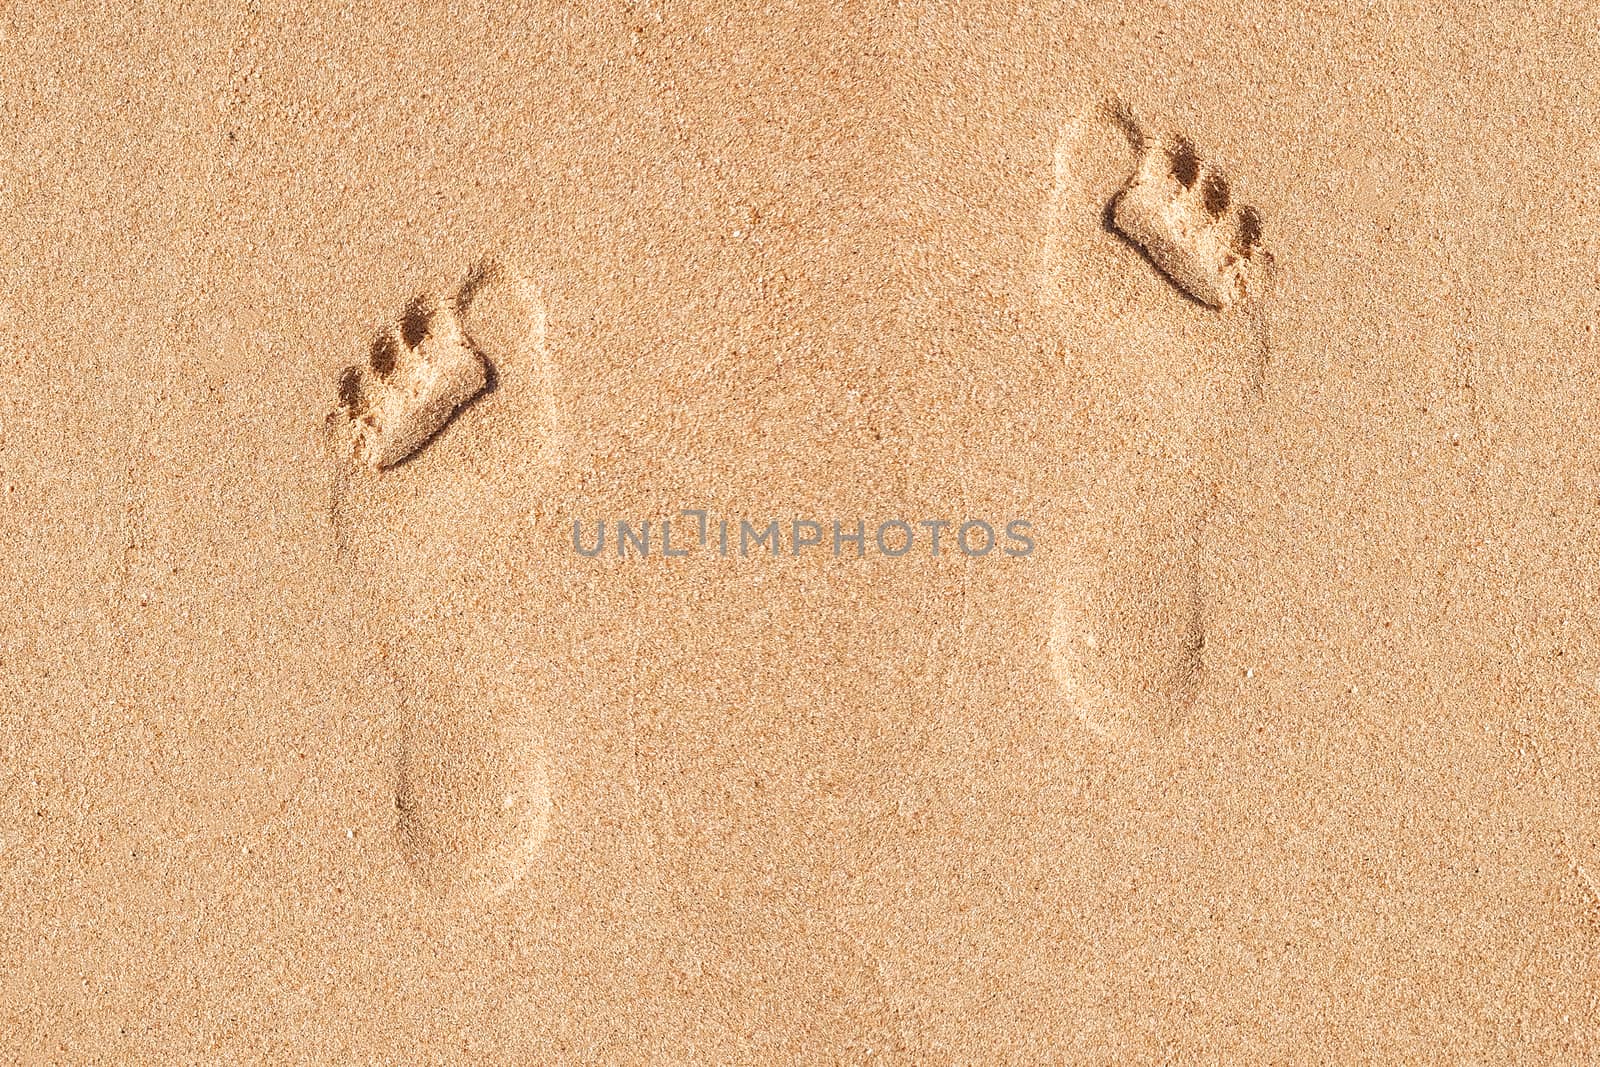 Foot print in the Sand